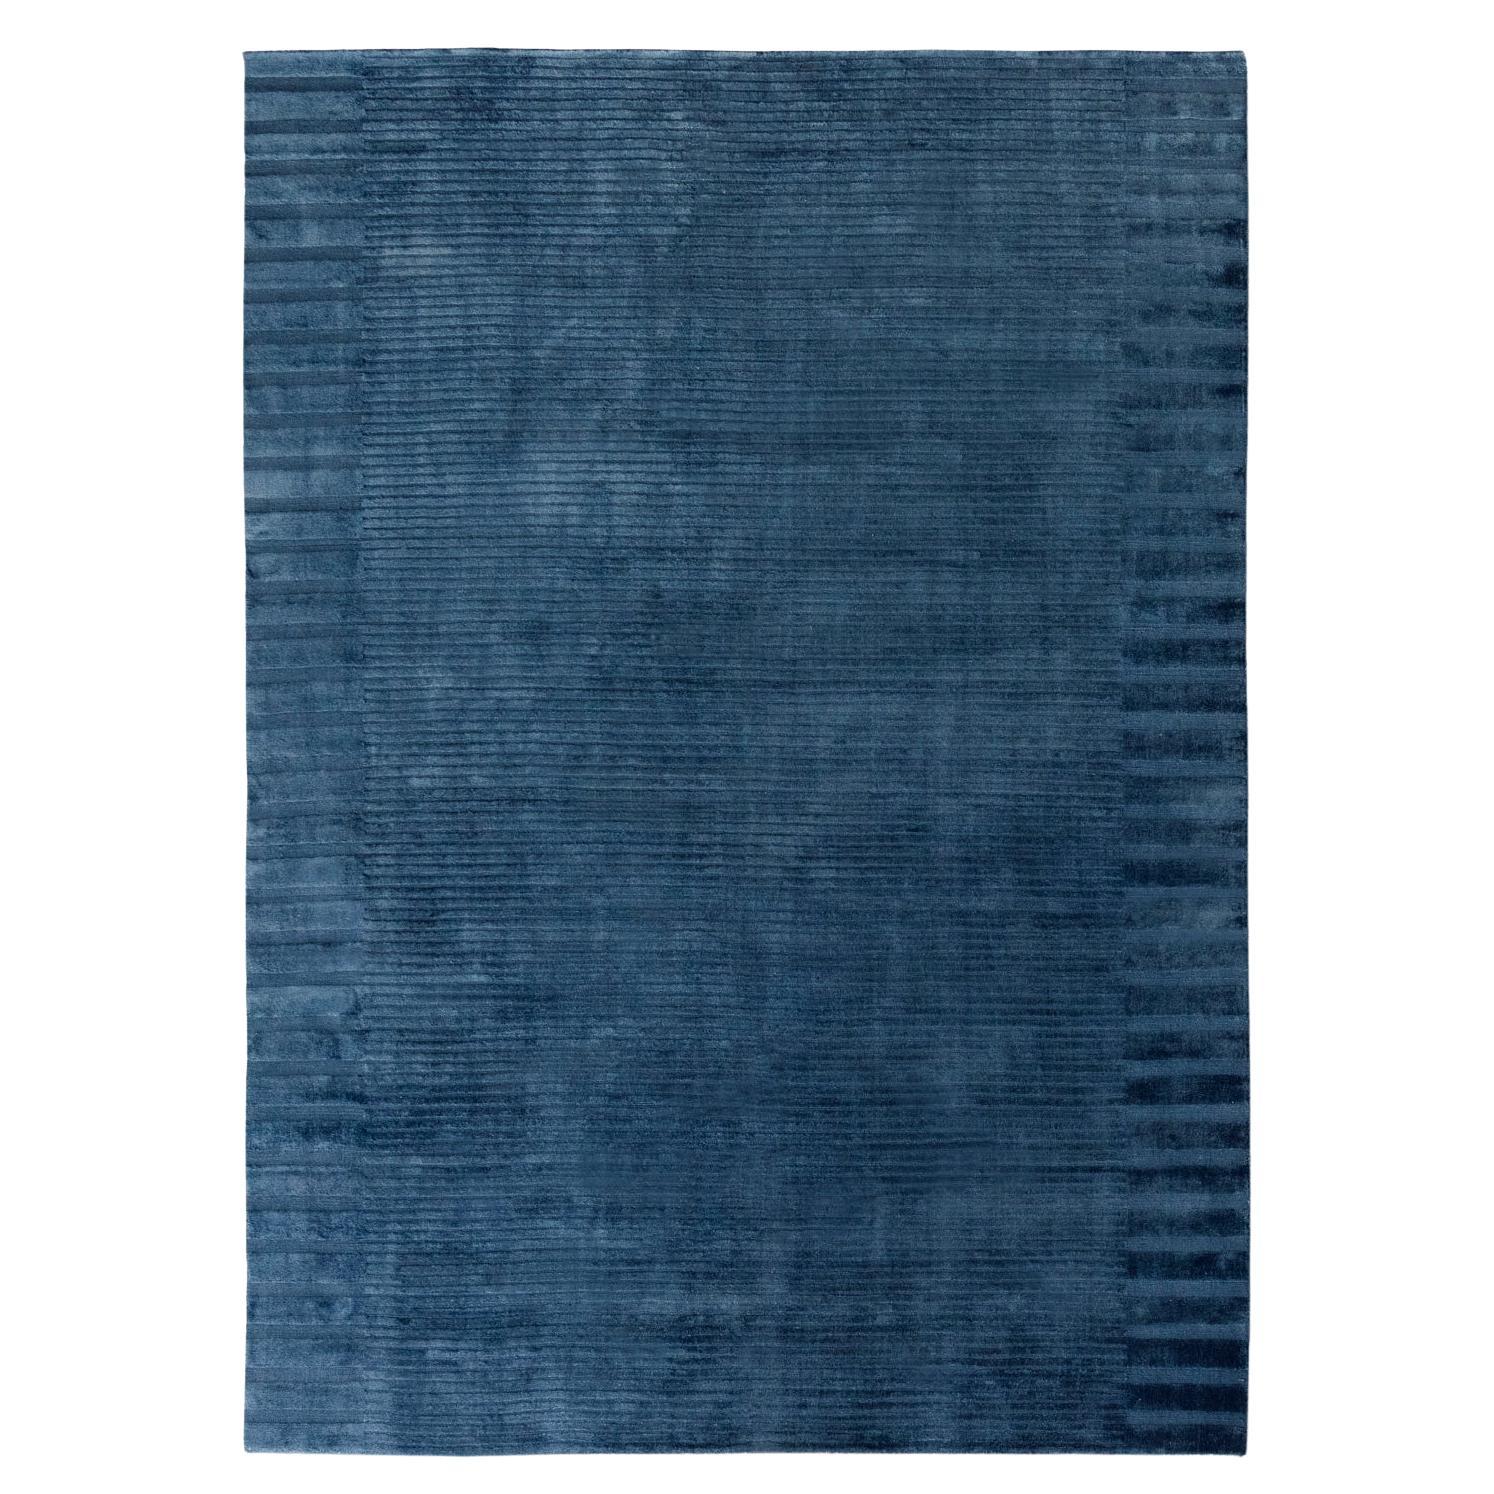 21st Cent Natural Striped Spring Blue Rug by Deanna Comellini In Stock 250x350cm